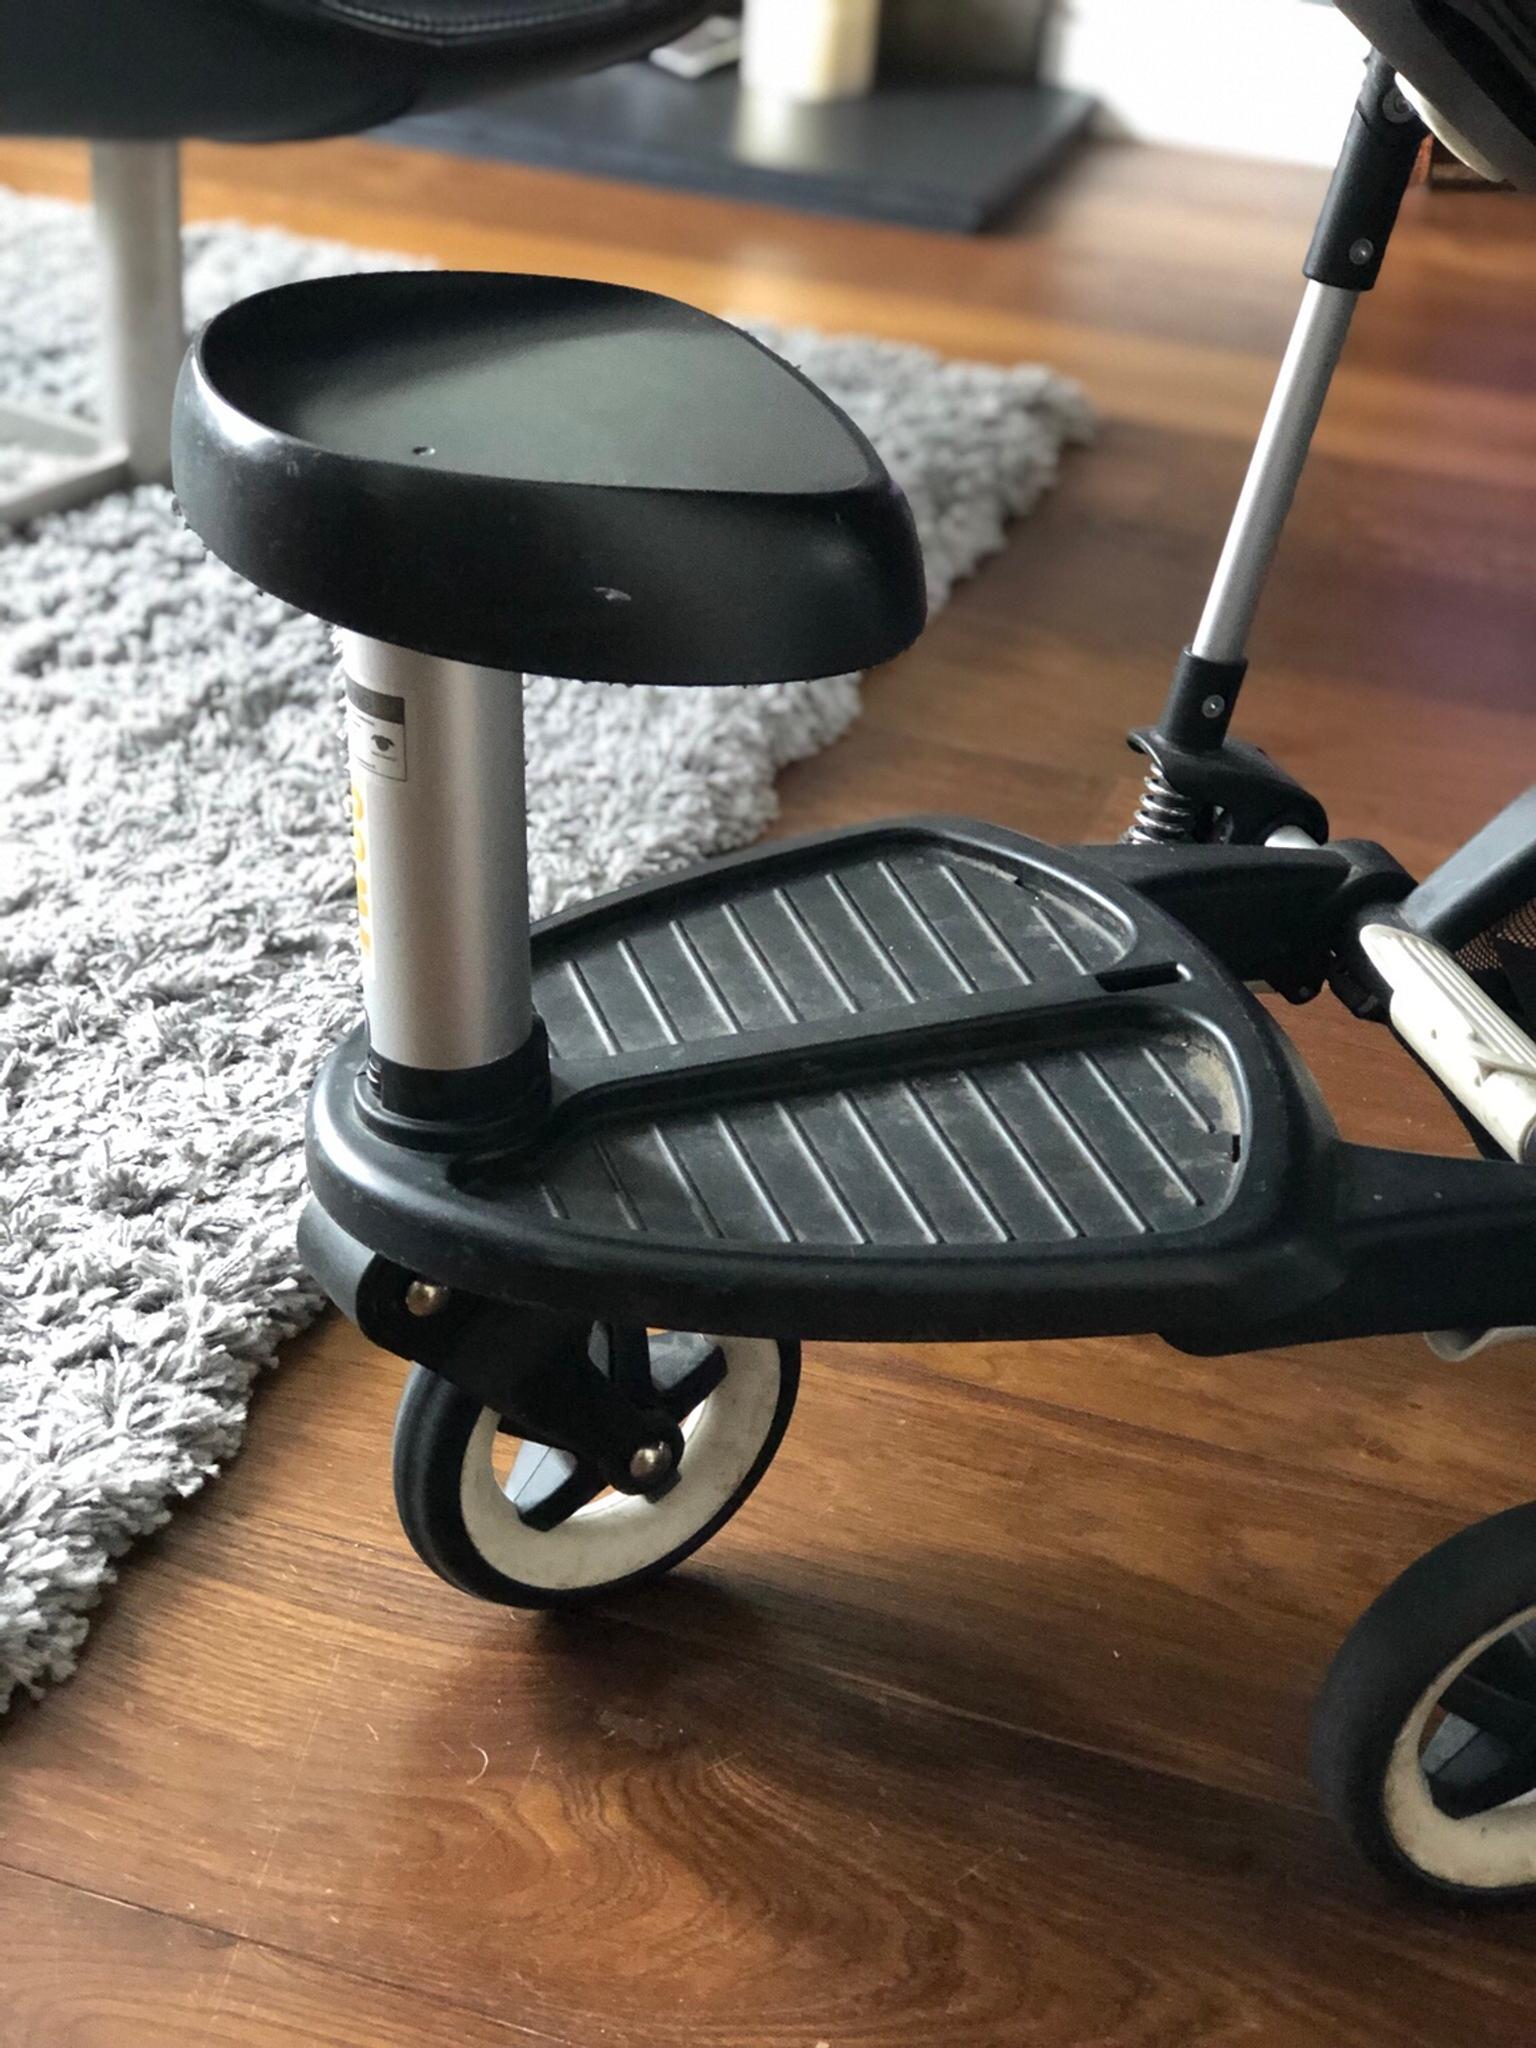 bugaboo wheeled board seat only